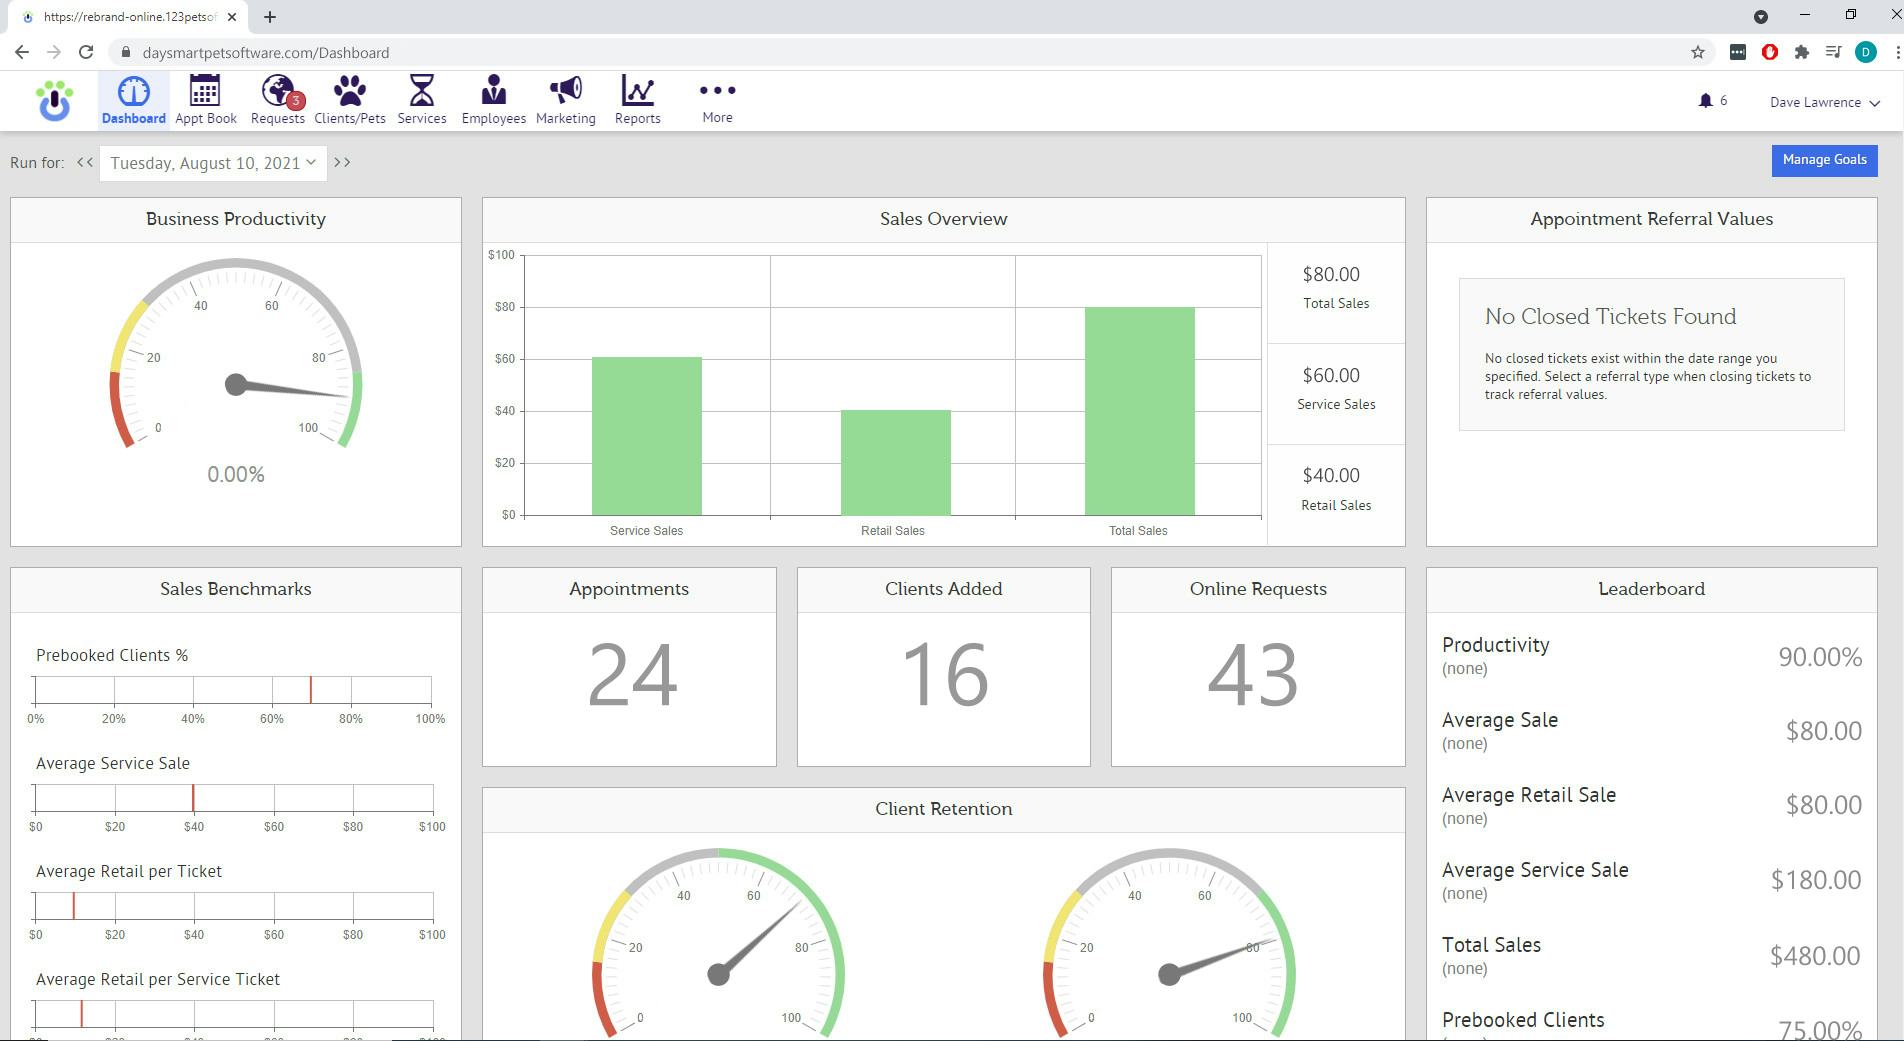 DaySmart Pet Software - Performance Dashboards & Business Reports